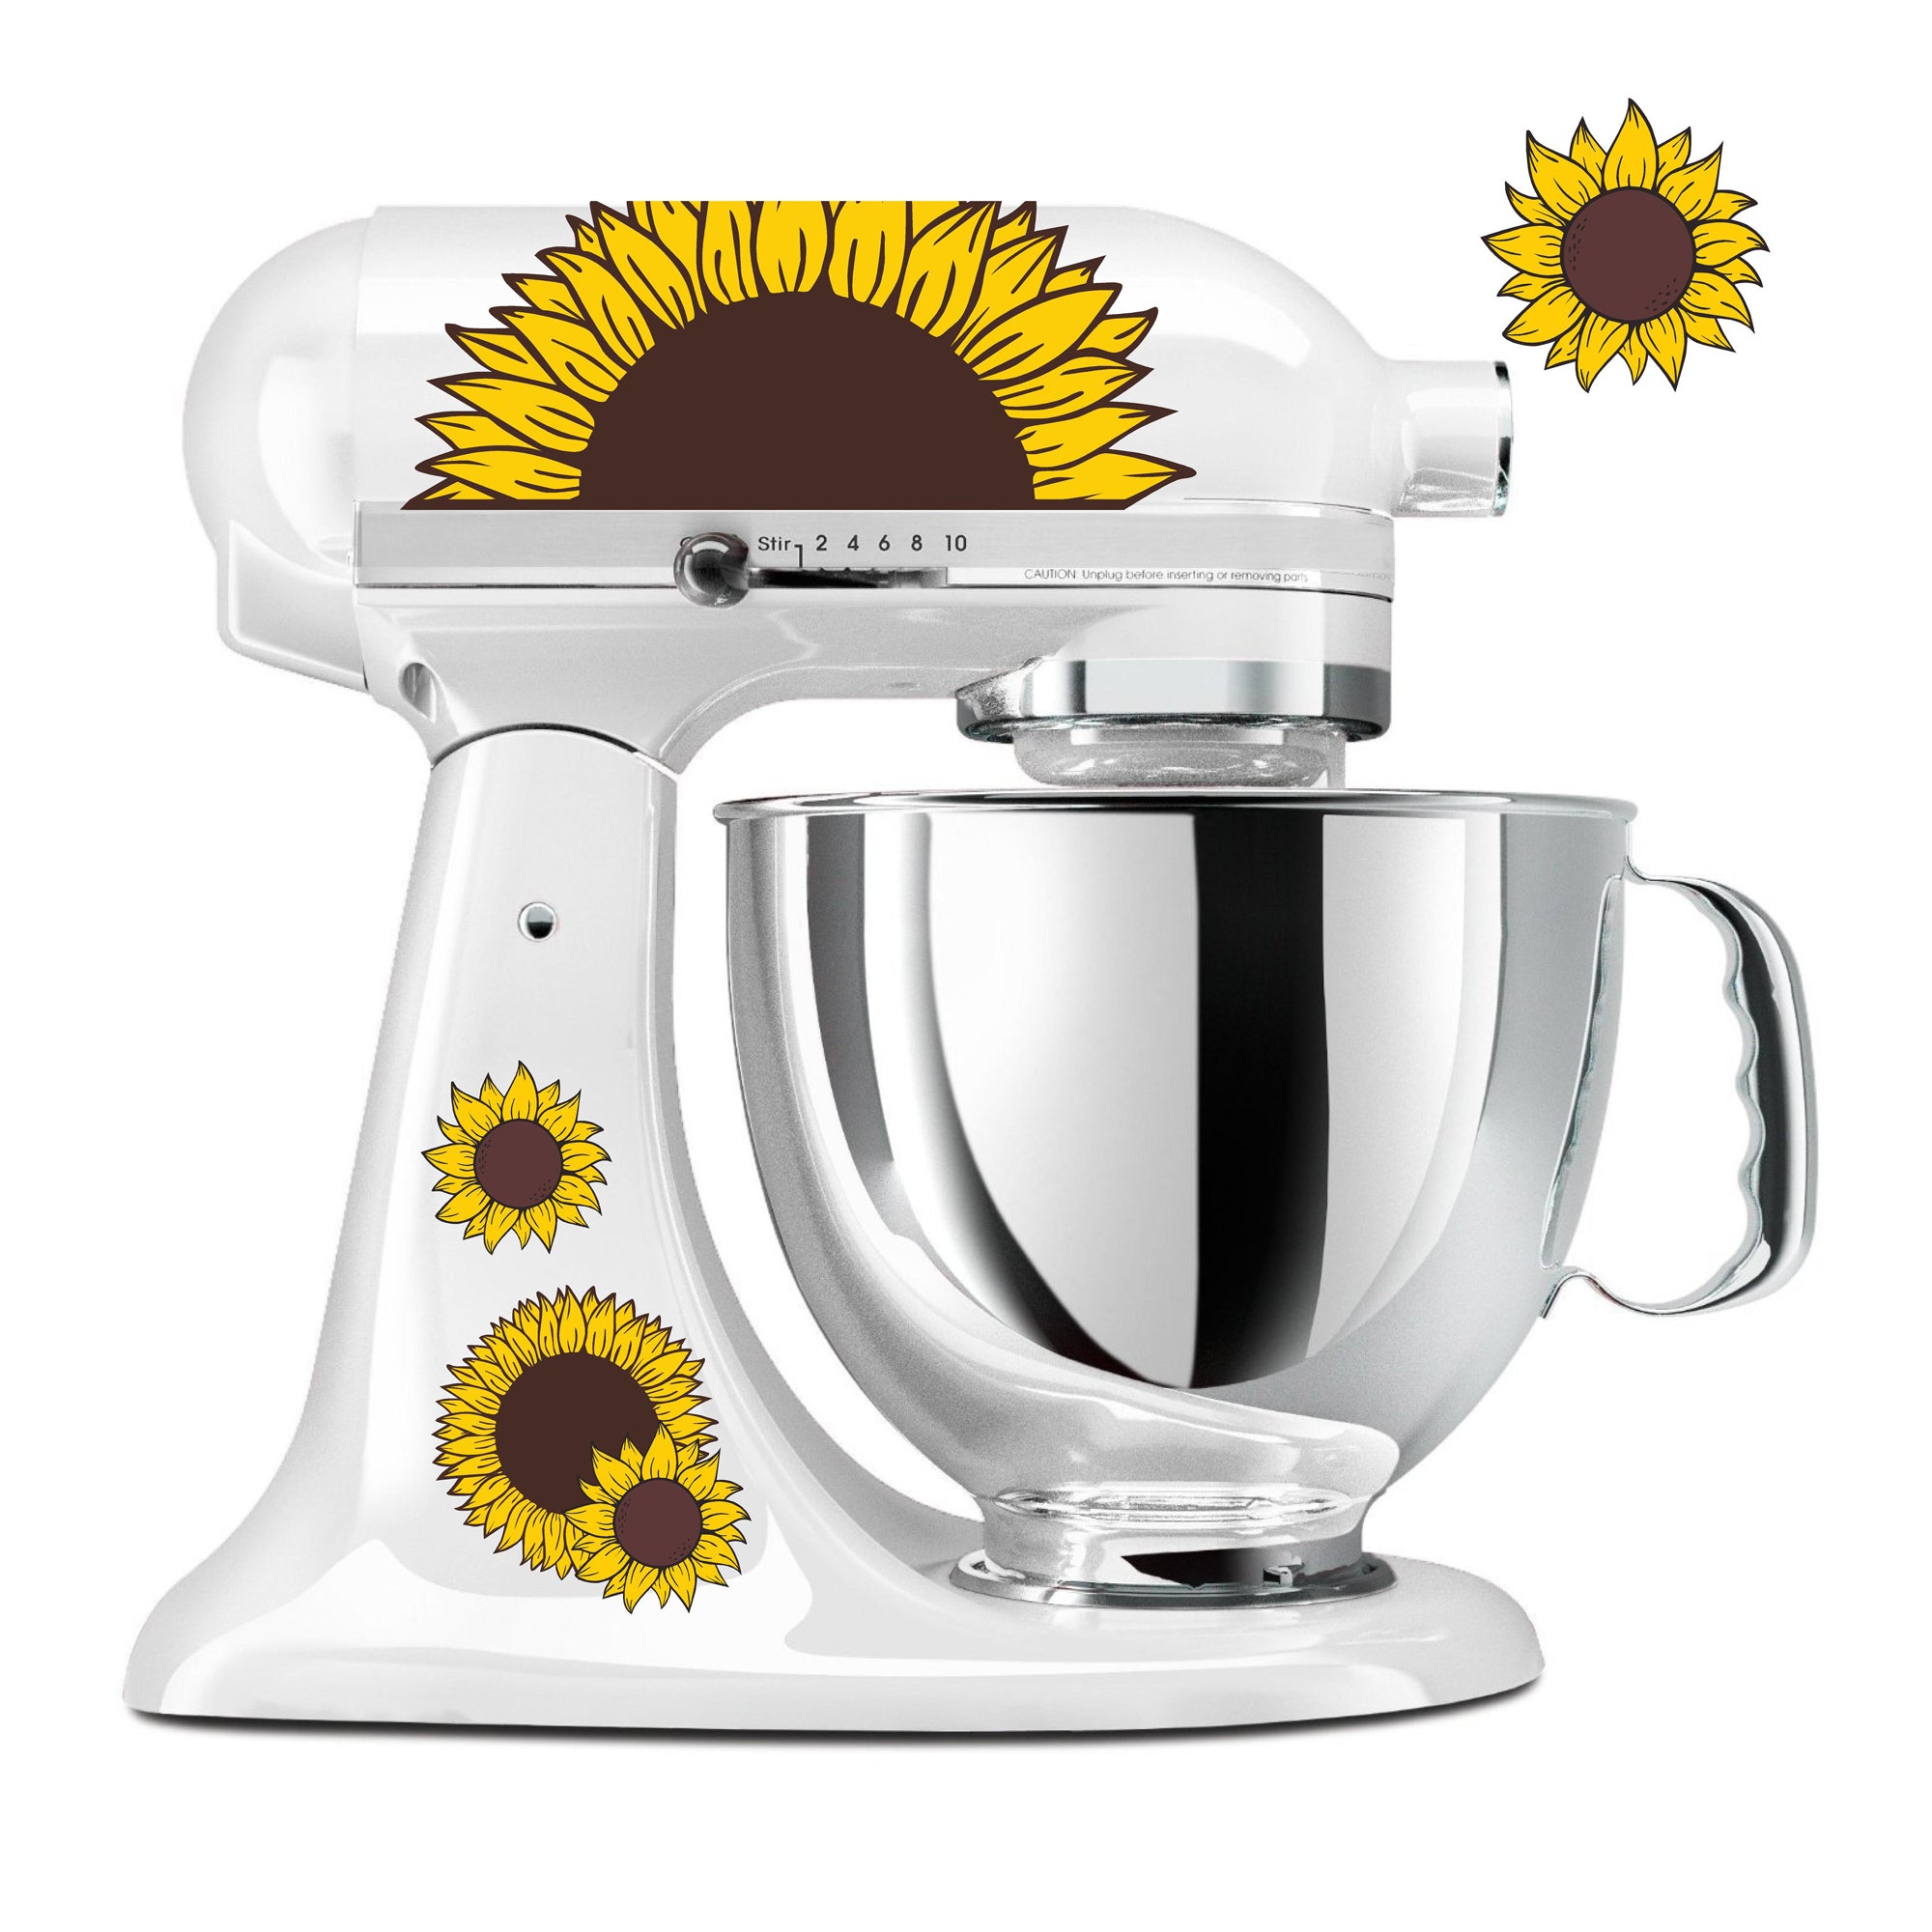 Spinning Sunflower Kitchen Stand Mixer Hub Cover Decoration